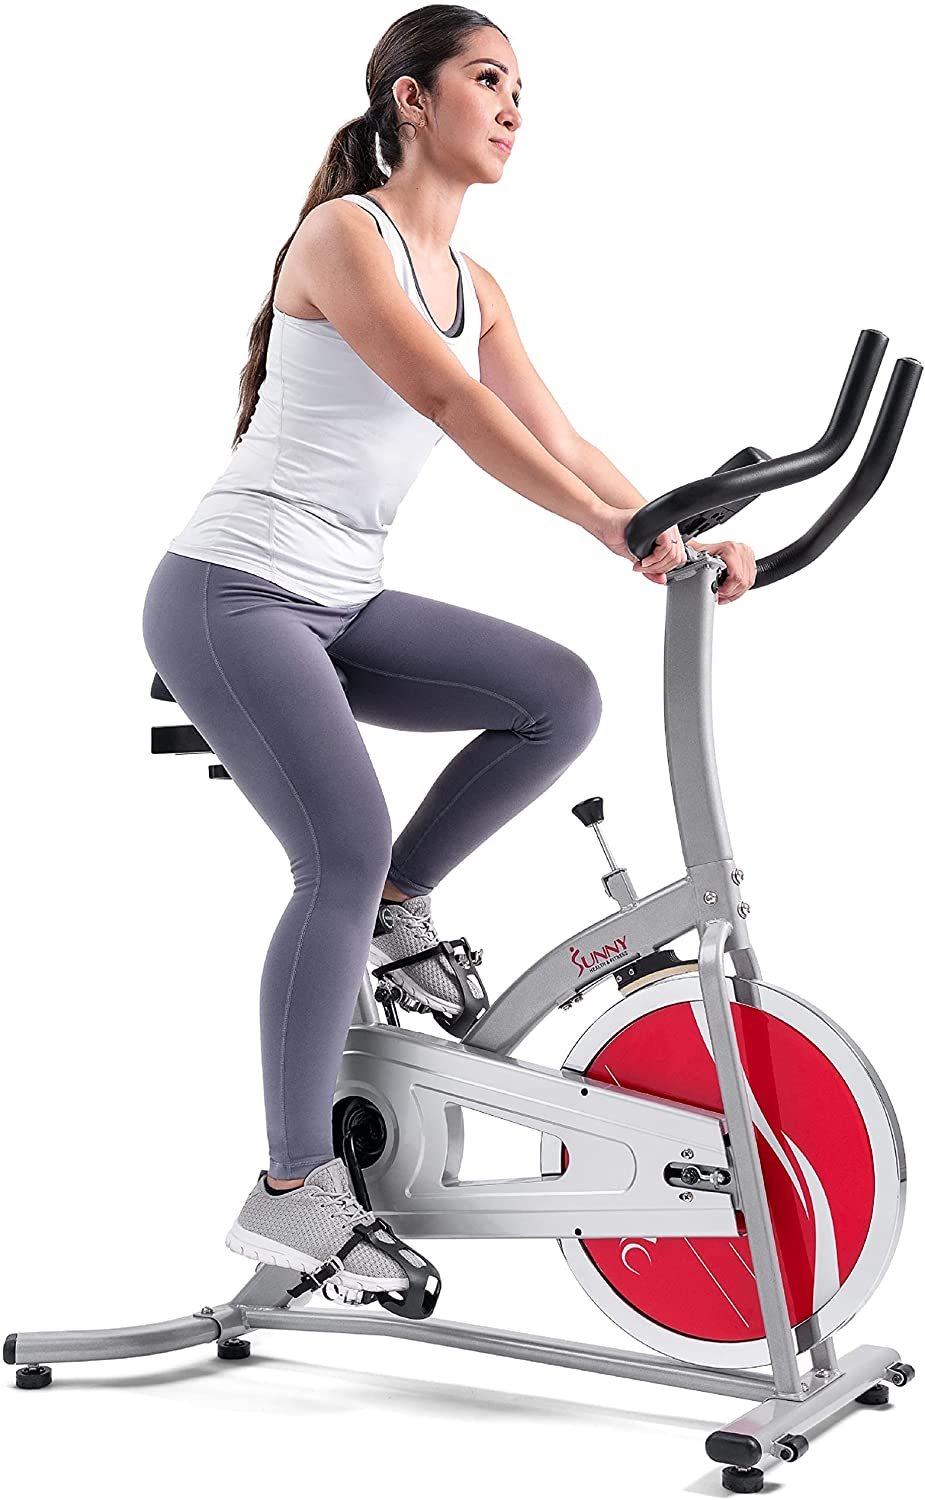 Sunny Health & Fitness Indoor Cycle Exercise Bike $108 + free s/h at Amazon